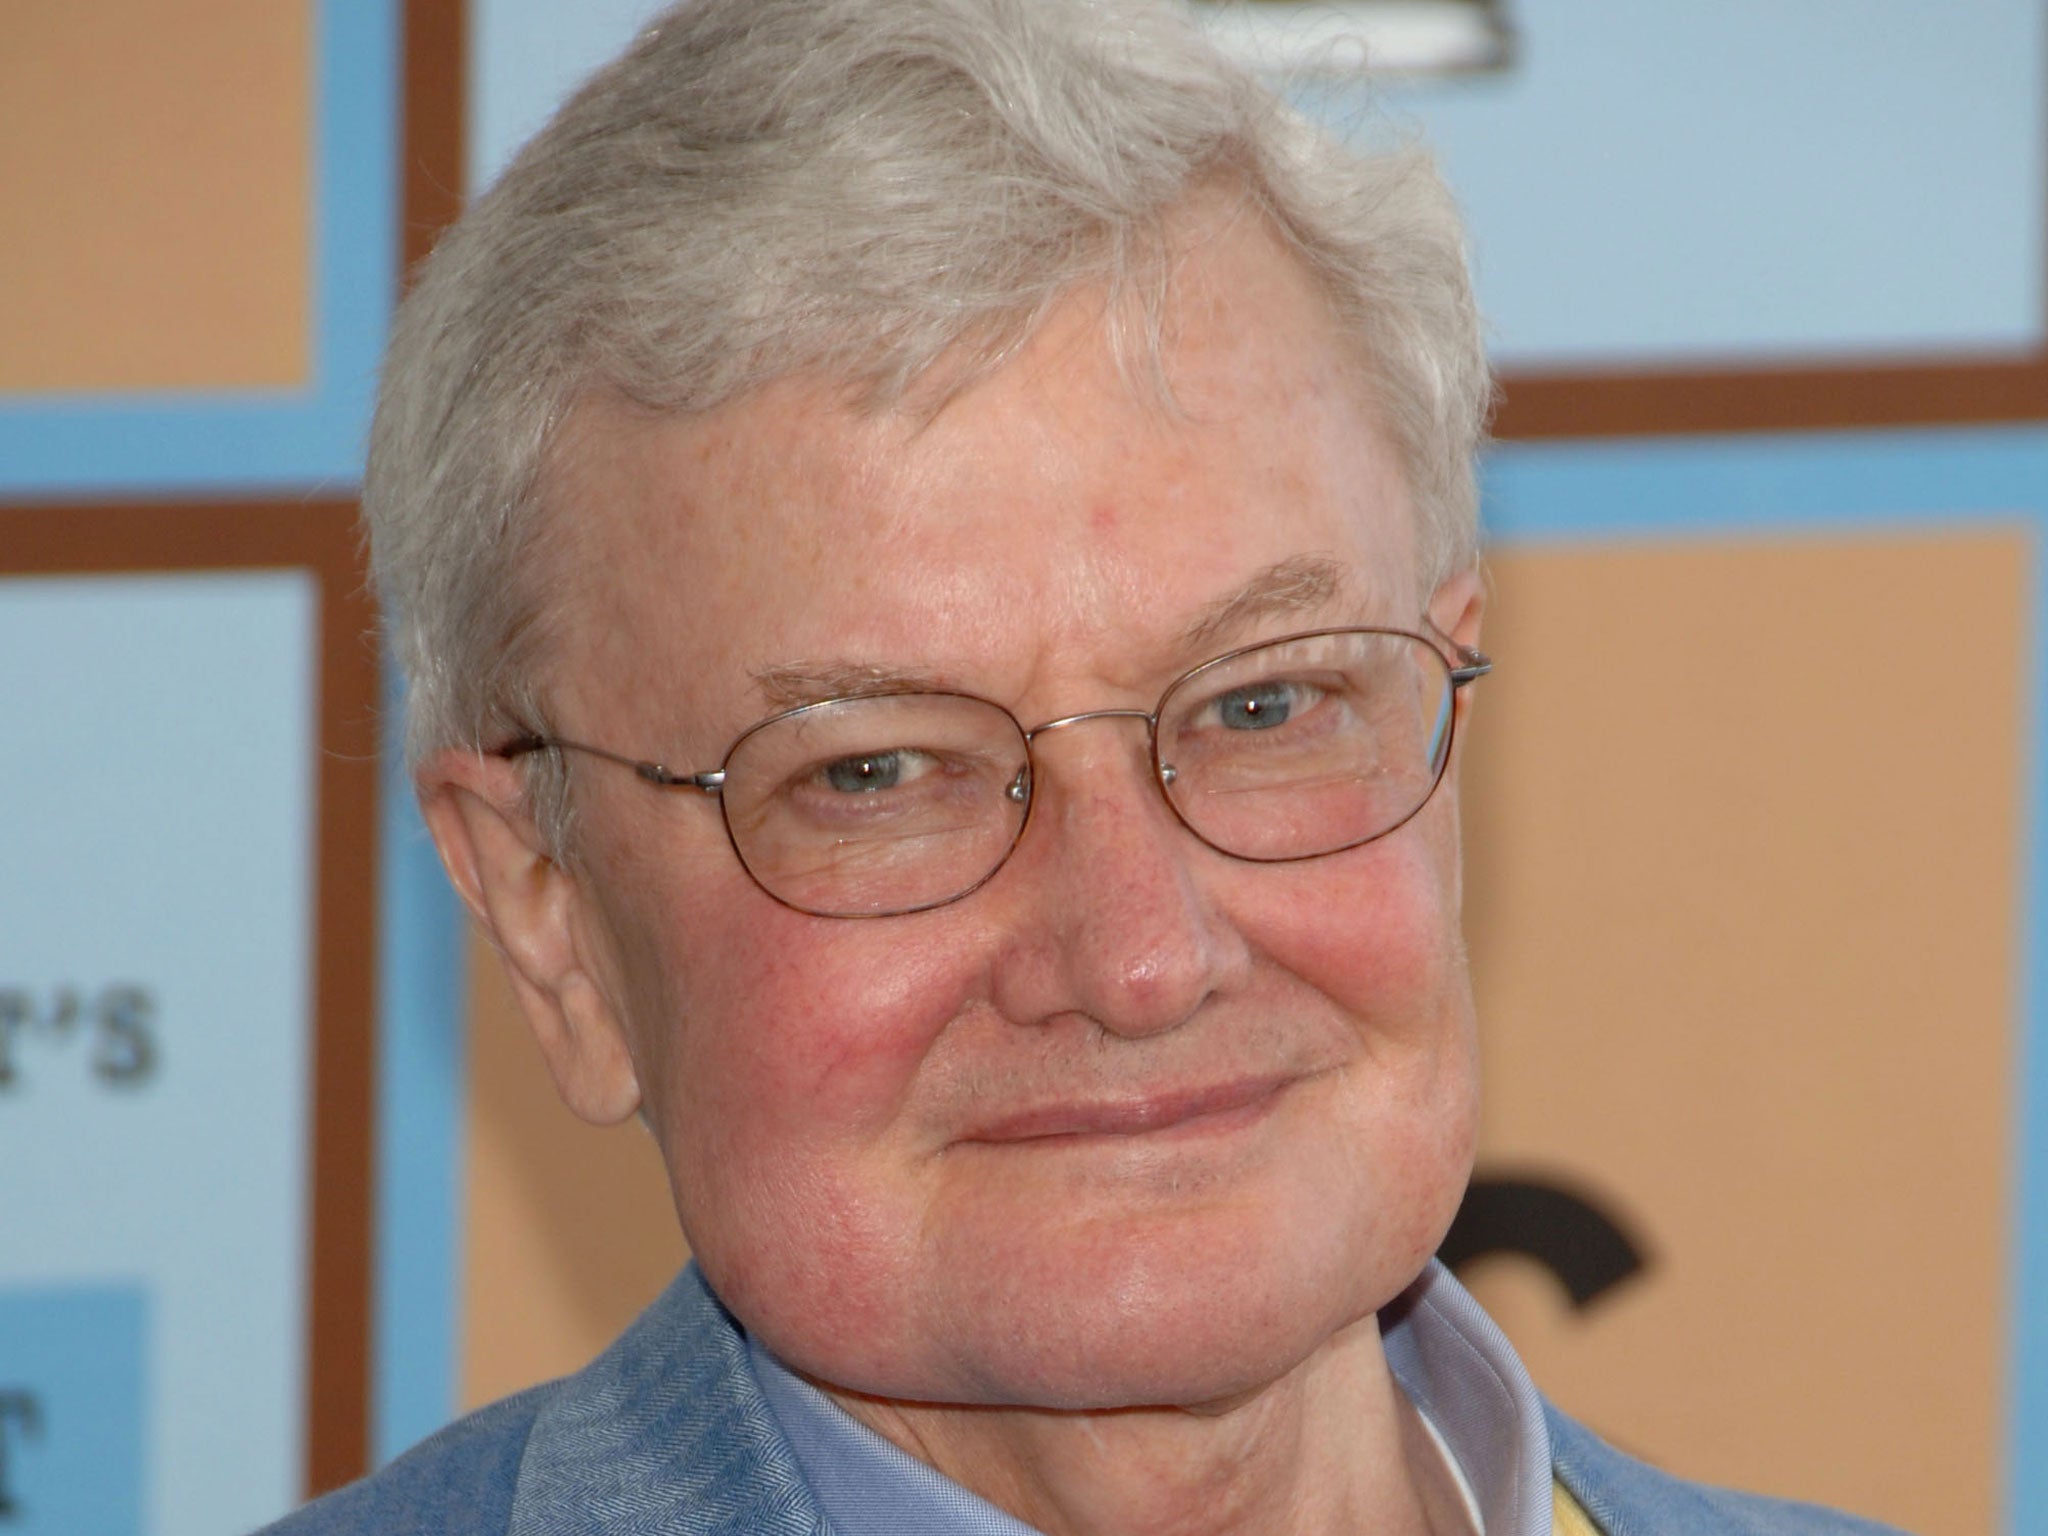 Roger Ebert, one of the most popular film reviewers of his time, has died at the age of 70